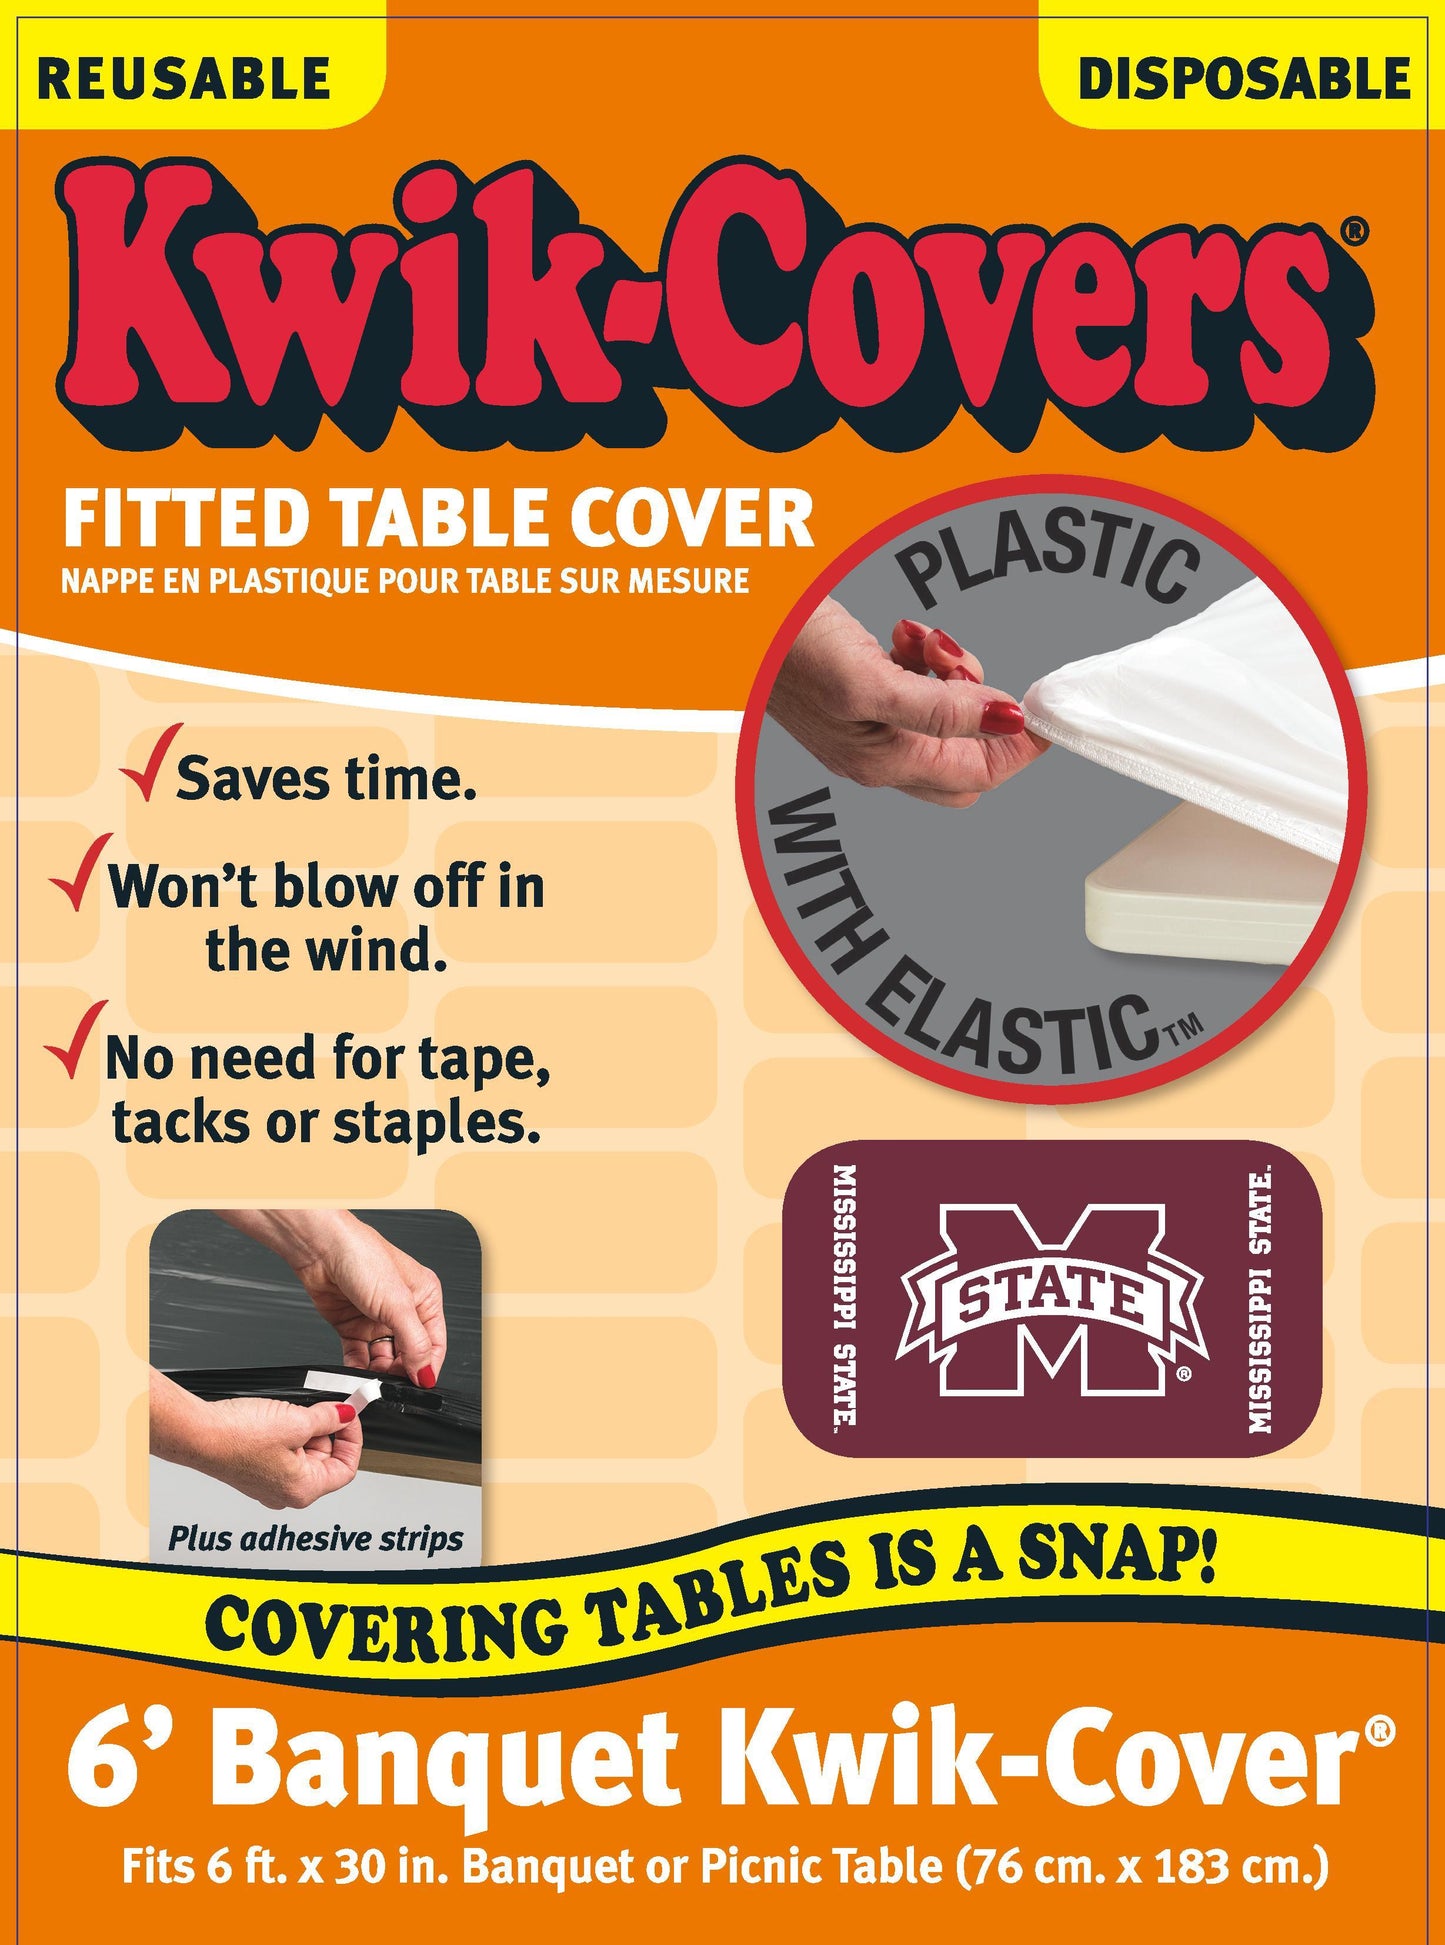 Collegiate Kwik-Covers Rectangle Plastic Table Cover (Mississippi State University)